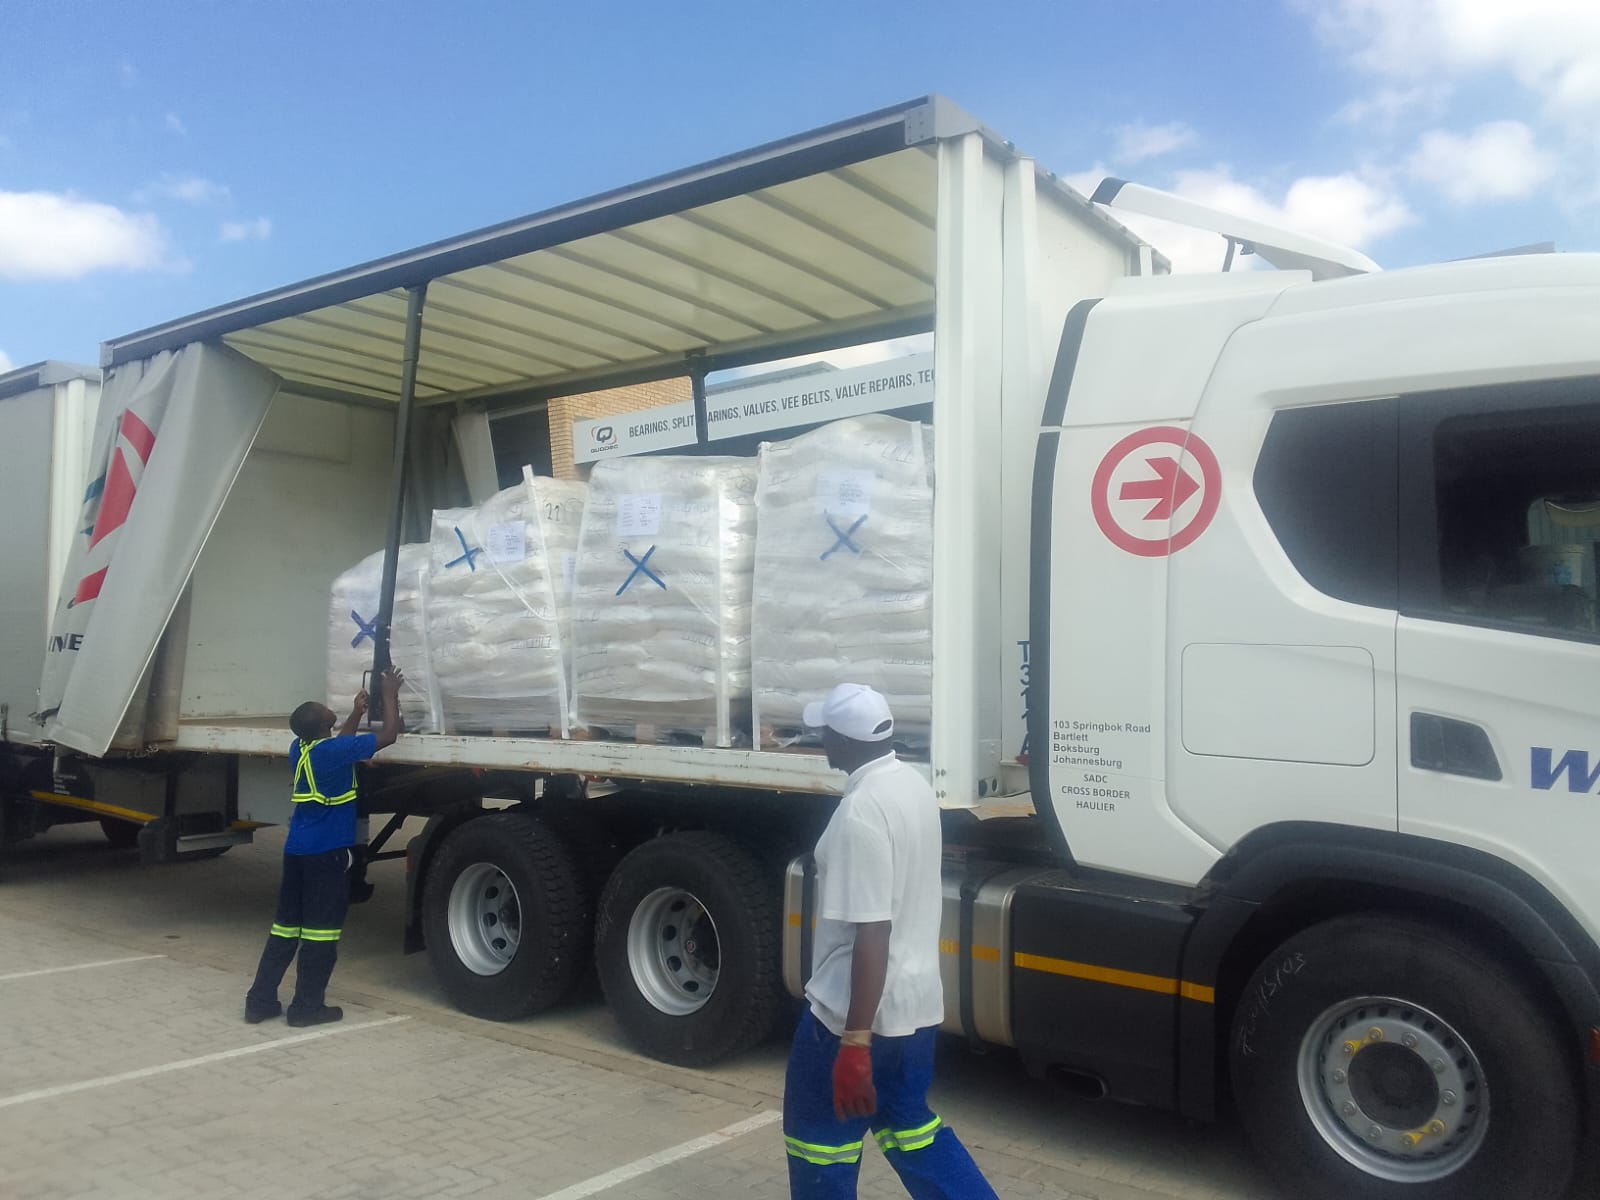 Barnabas-funded food aid already on its way to cyclone-affected Malawi Christians